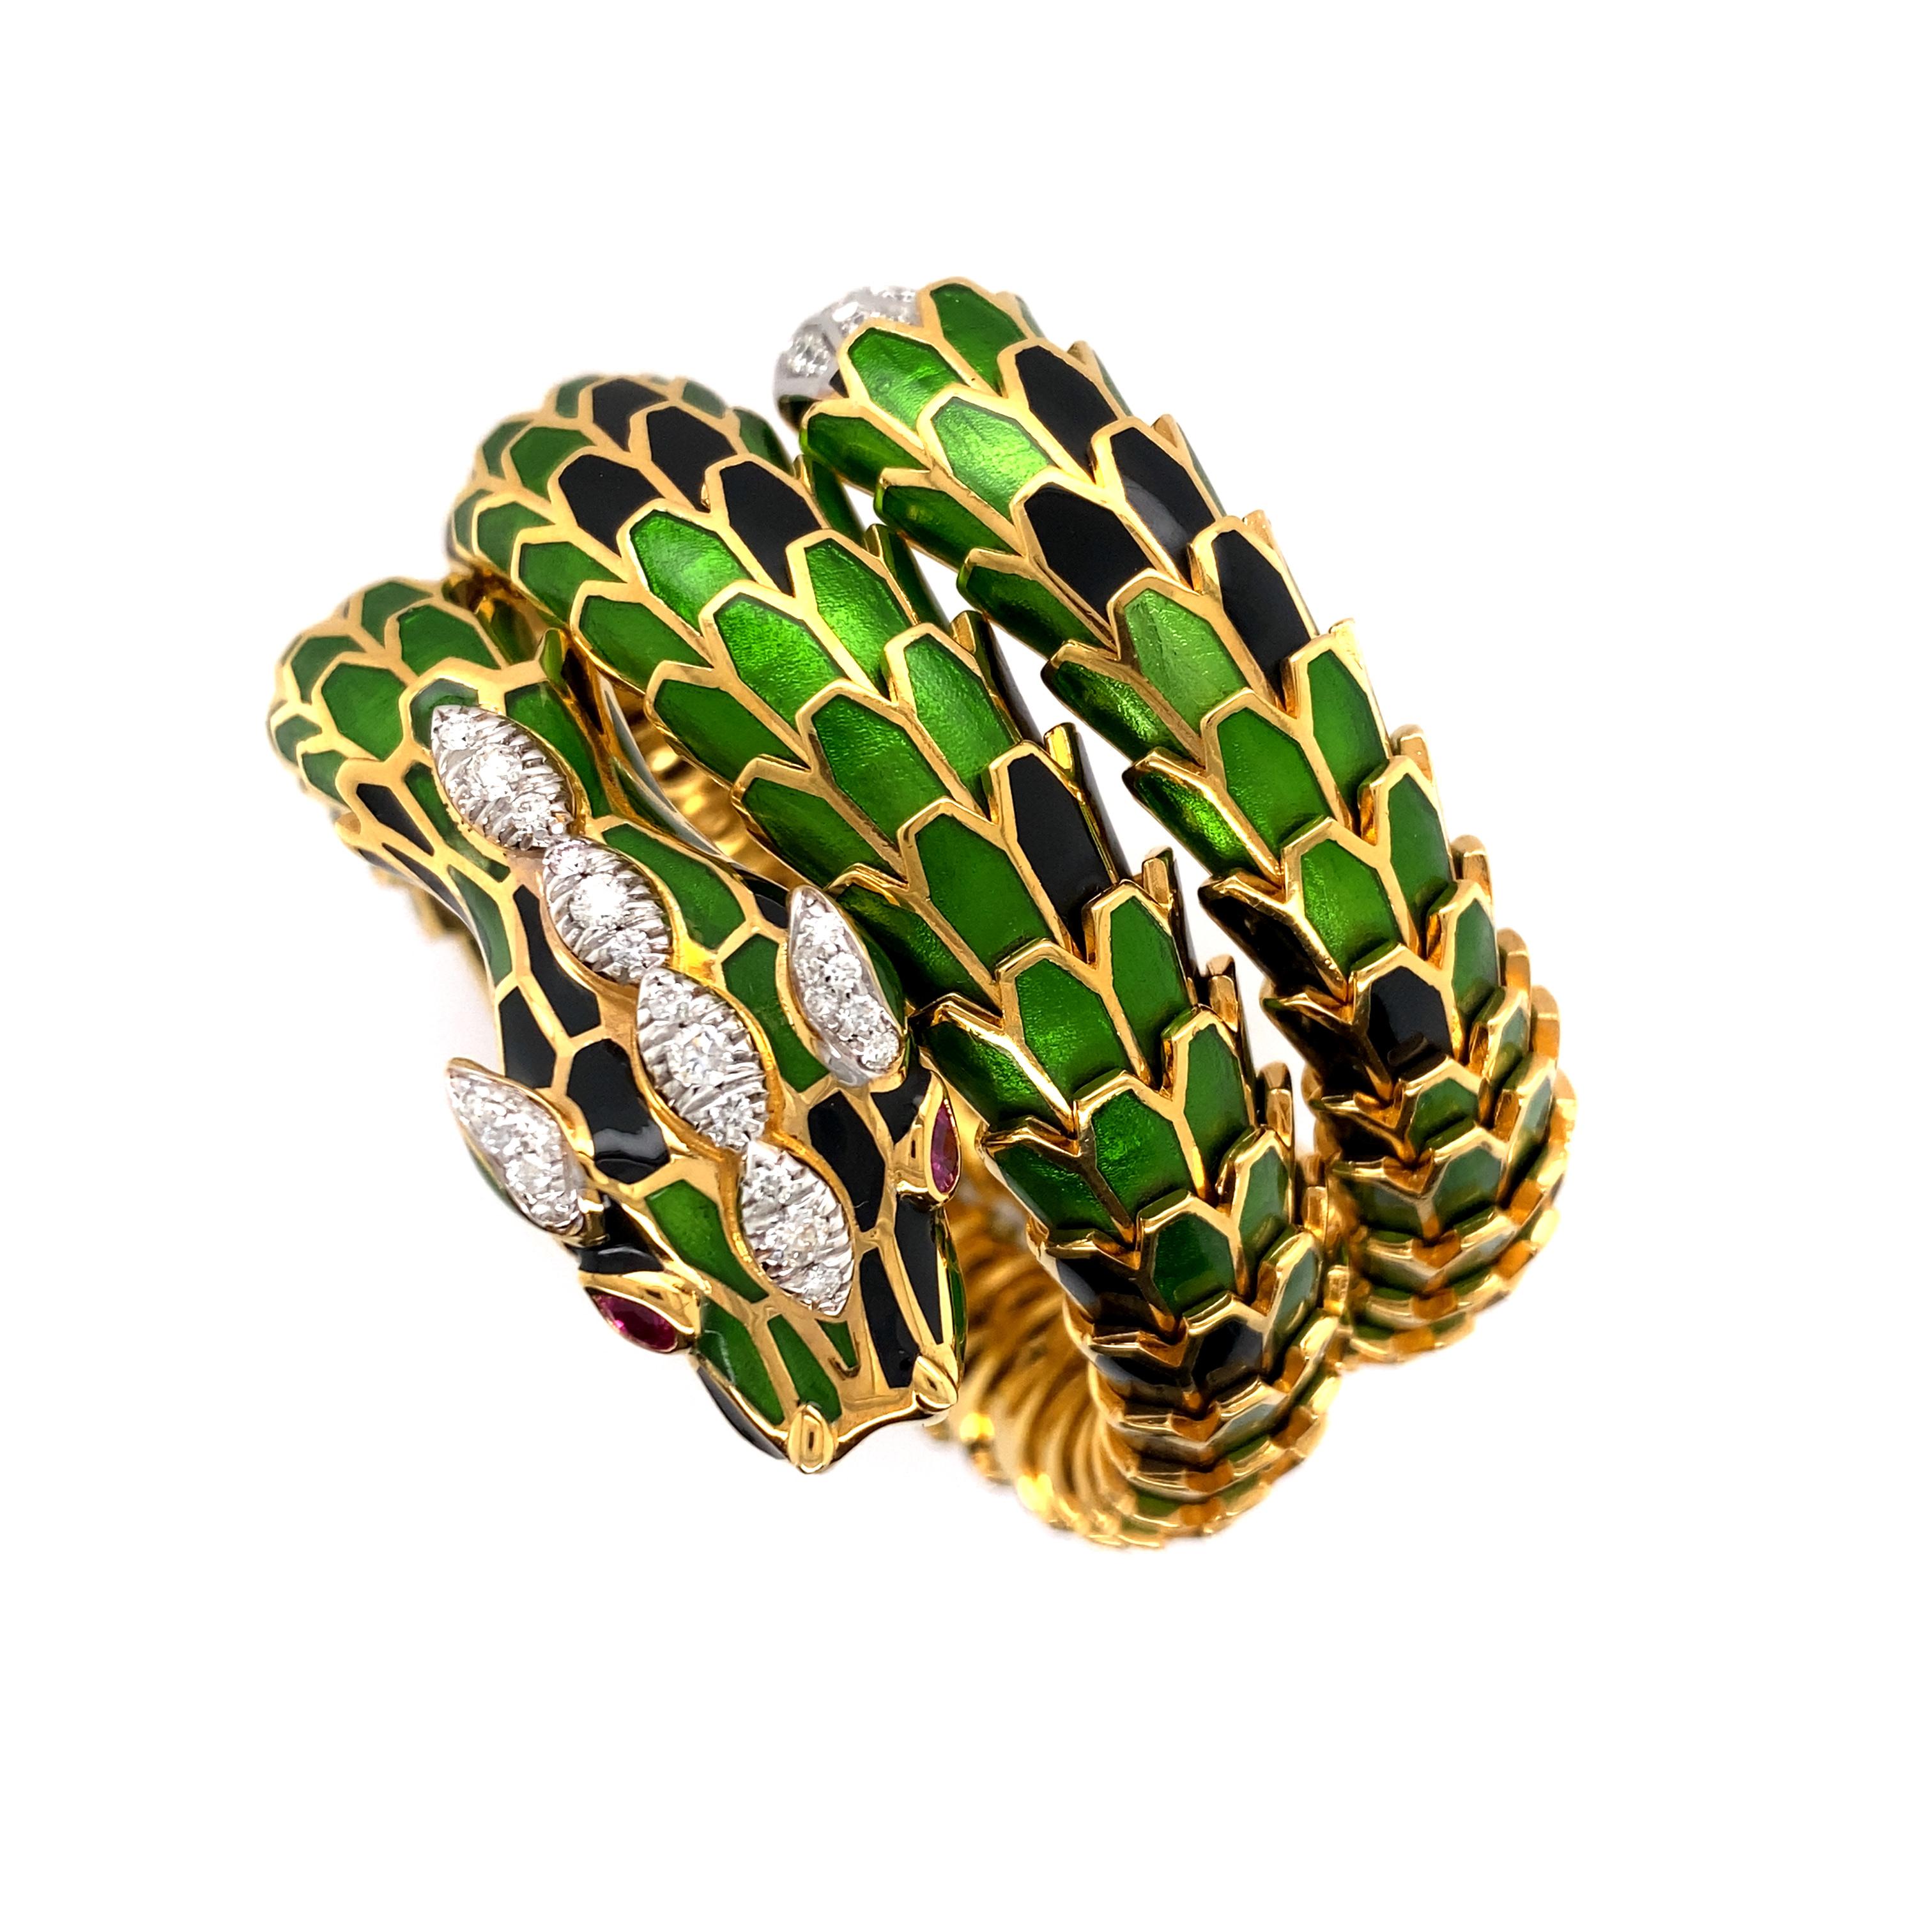 AN 18K GOLD AND ENAMEL DRAGON BRACELET, ITALY
In an adjustable serpentine design, the eyes set with marquise-shaped rubies, the scales applied with green and black enamel, further enhanced by pavé-set round diamonds weighting 0.85 carat, mounted in